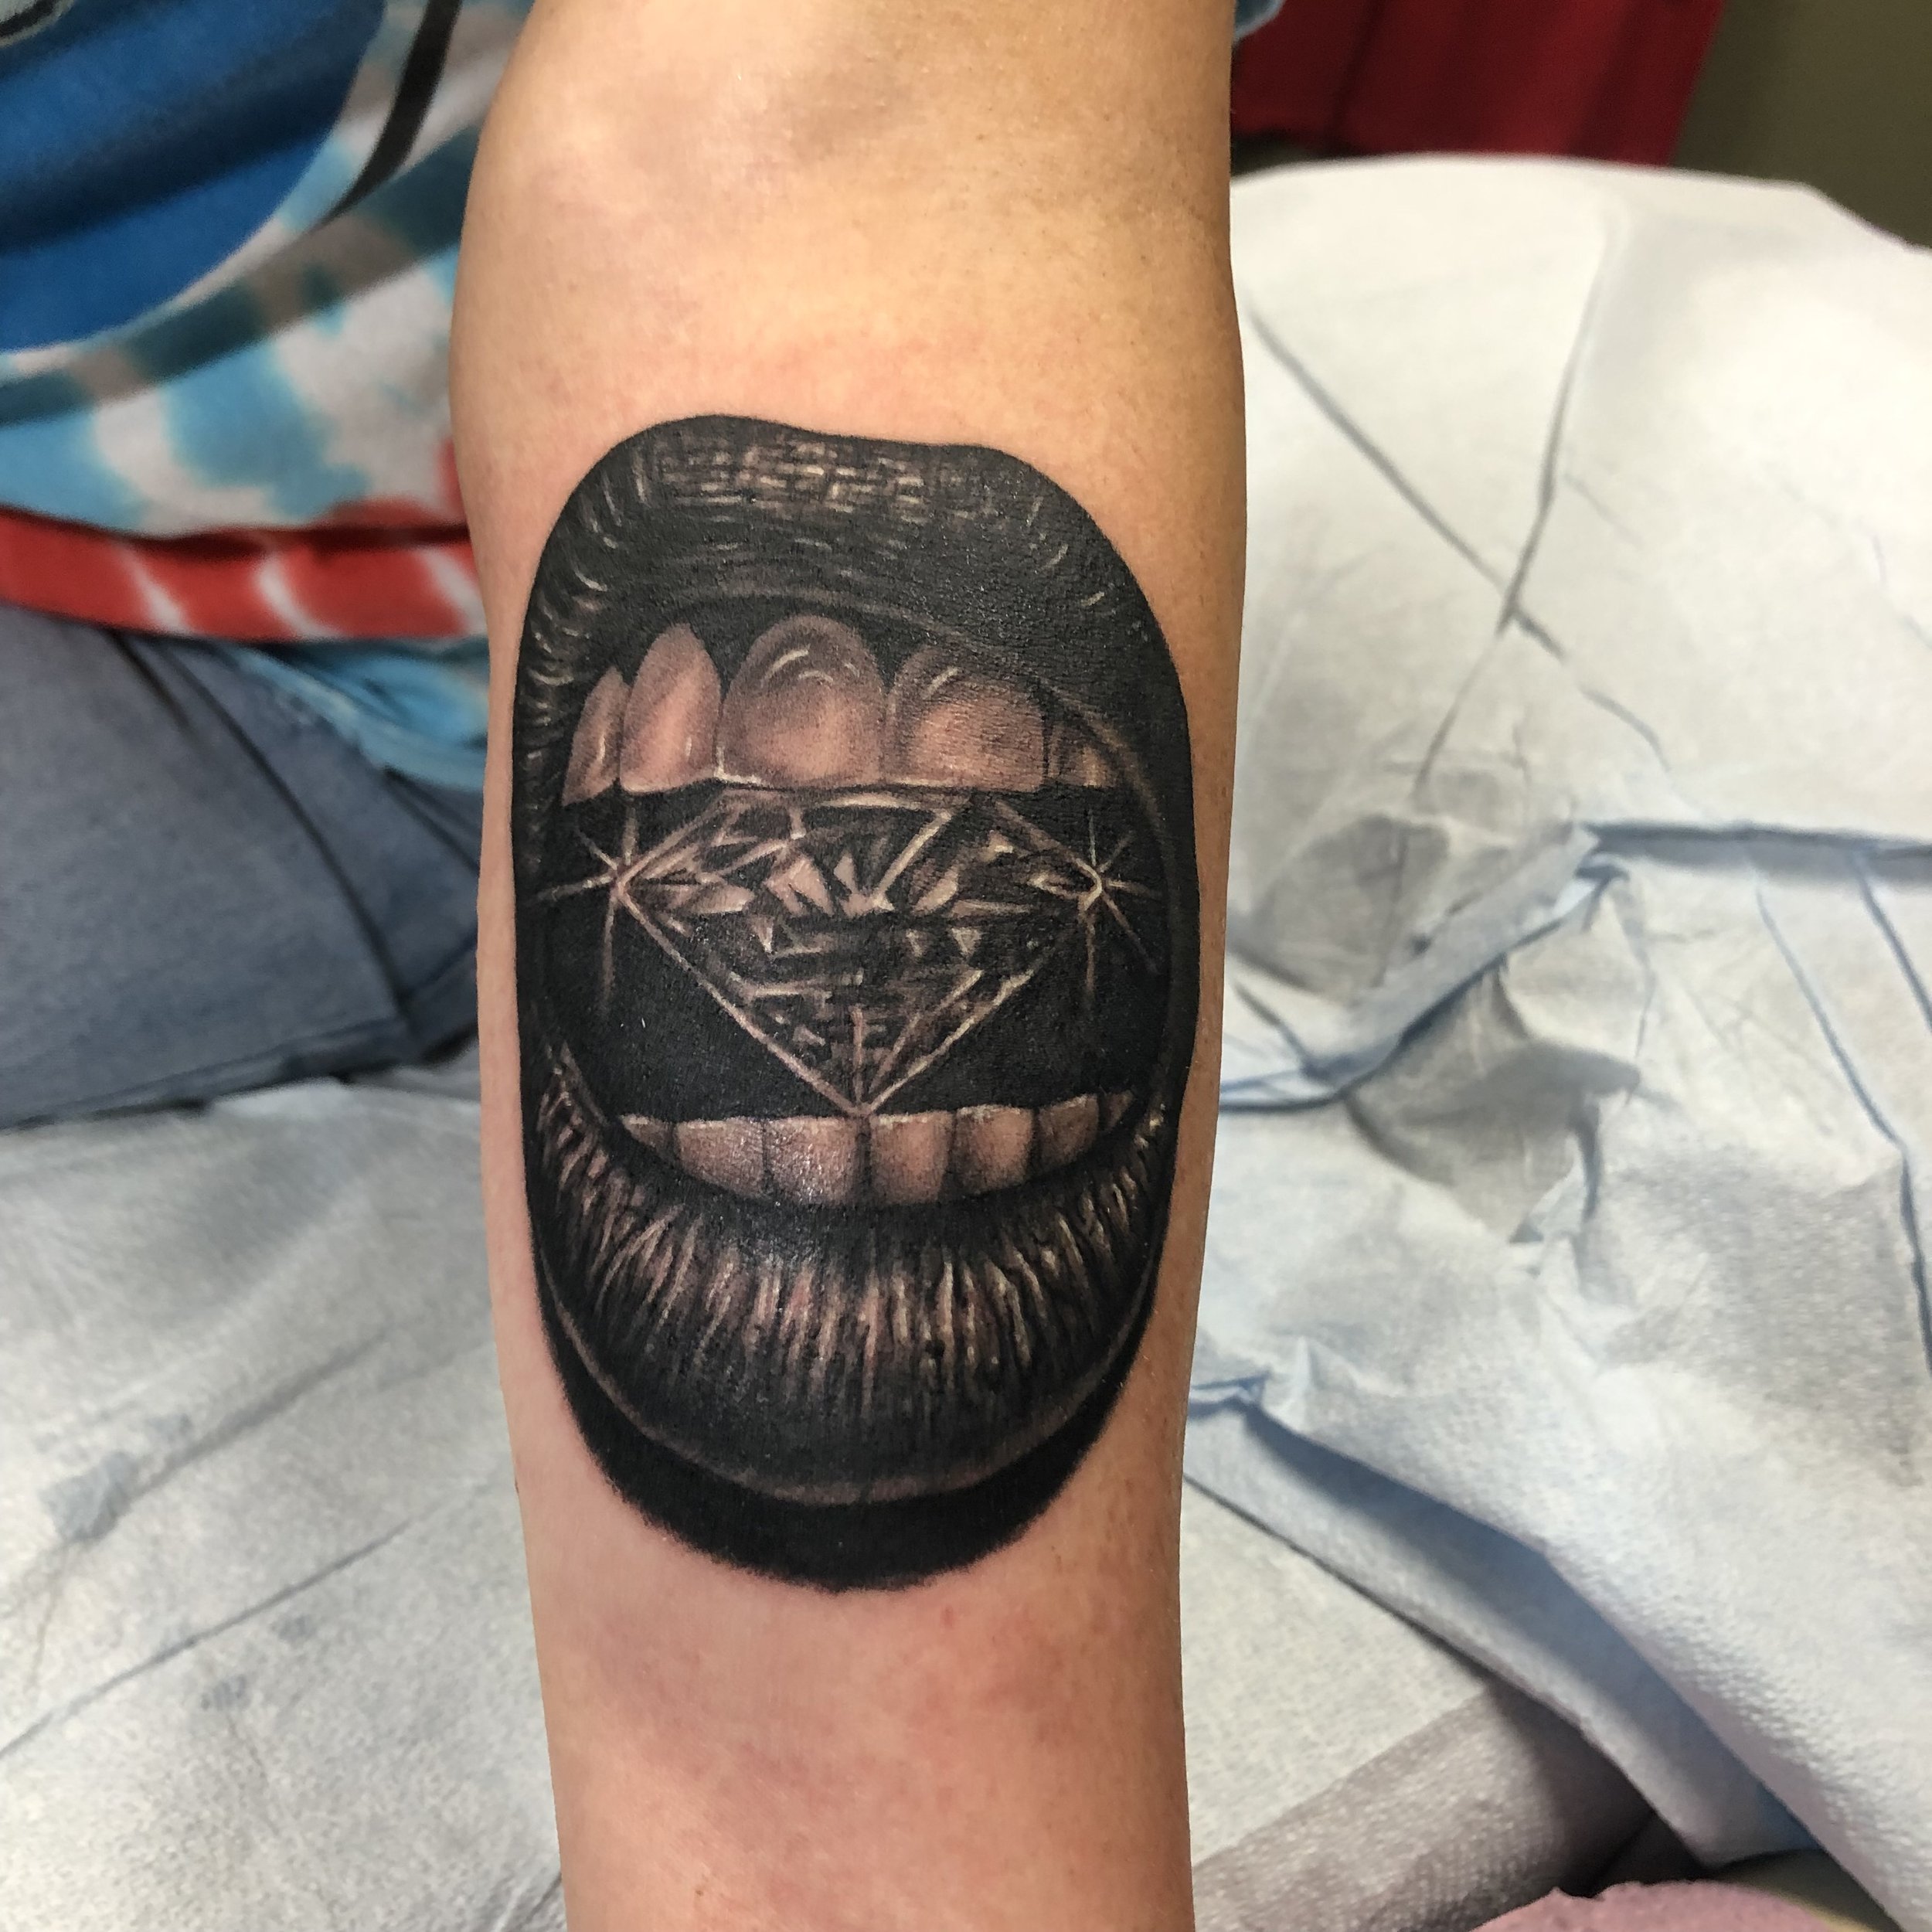 Grillz  Tattoos 1400 9th Avenue North Bessemer Reviews and Appointments   GetInked